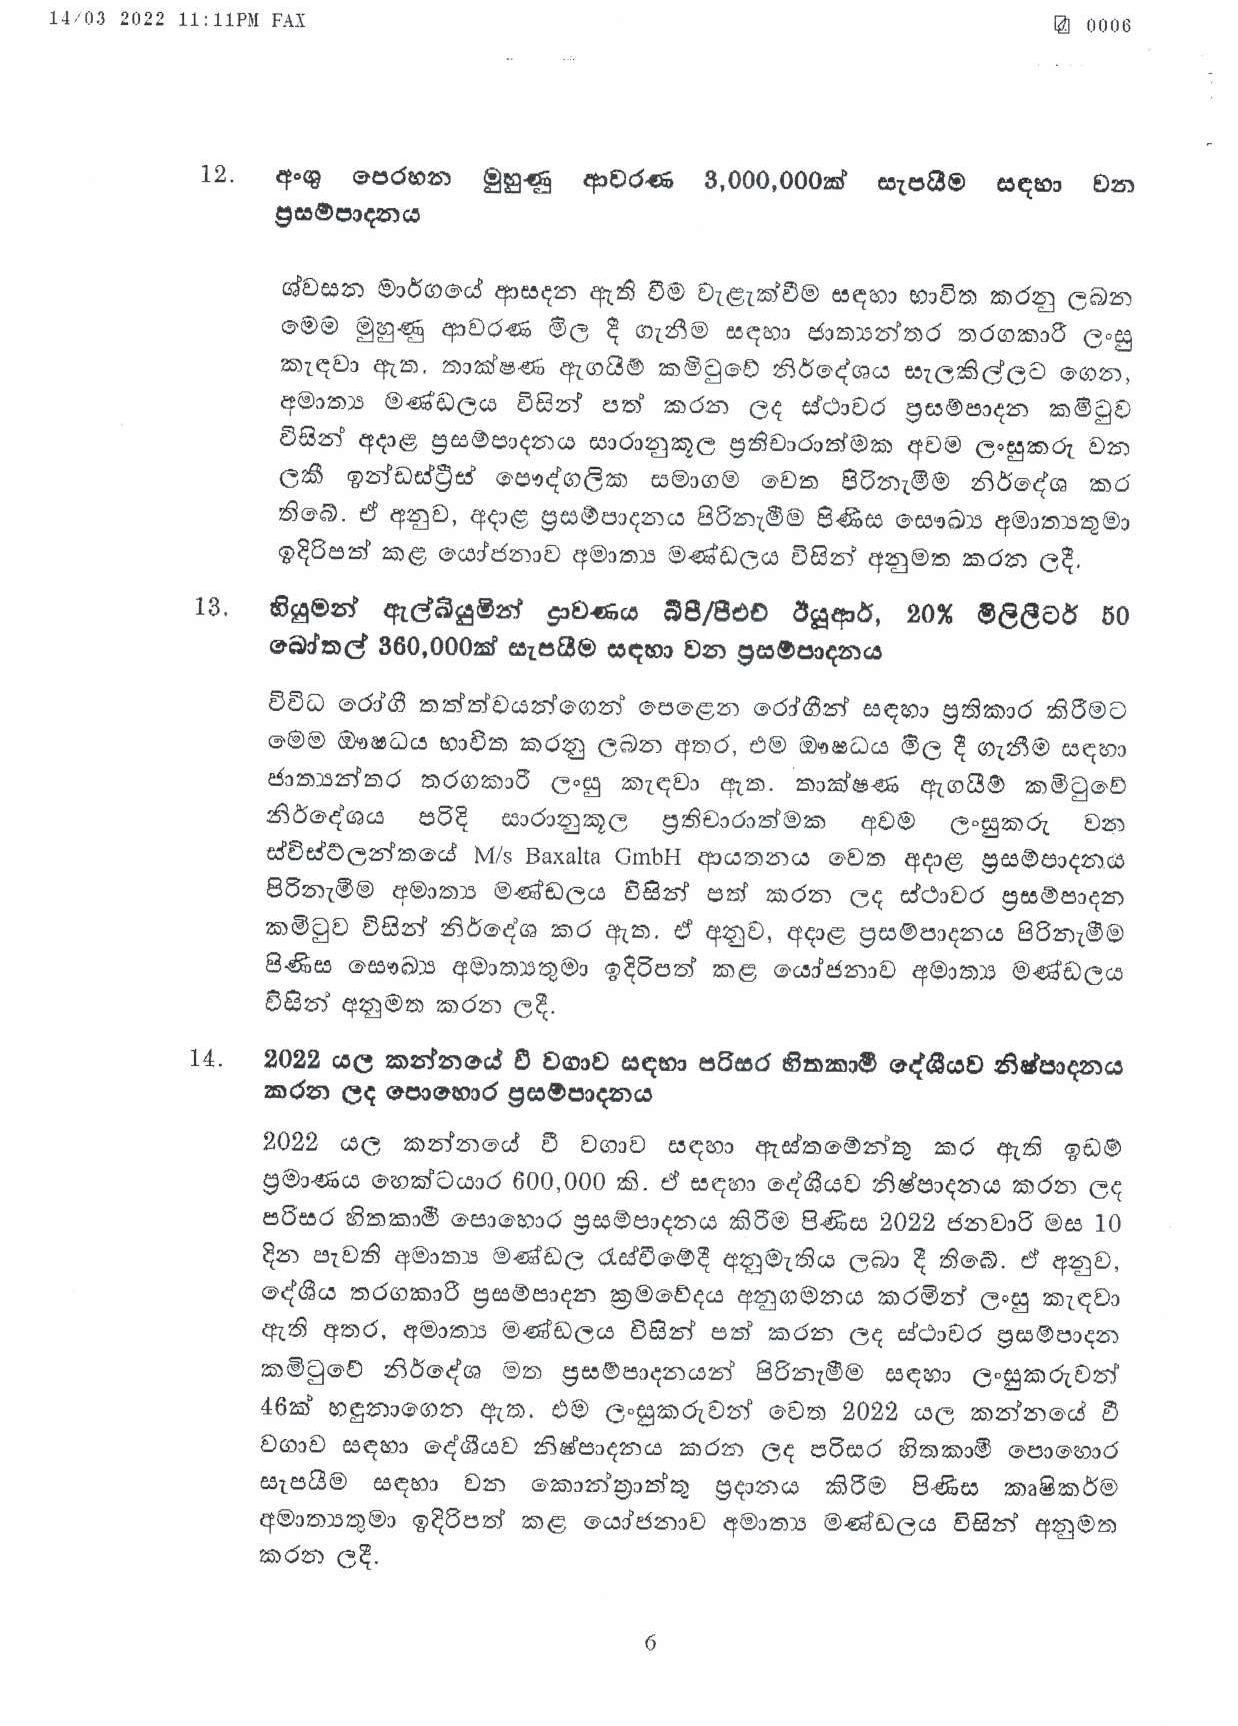 Cabinet Decision on 14.03.2022 page 006